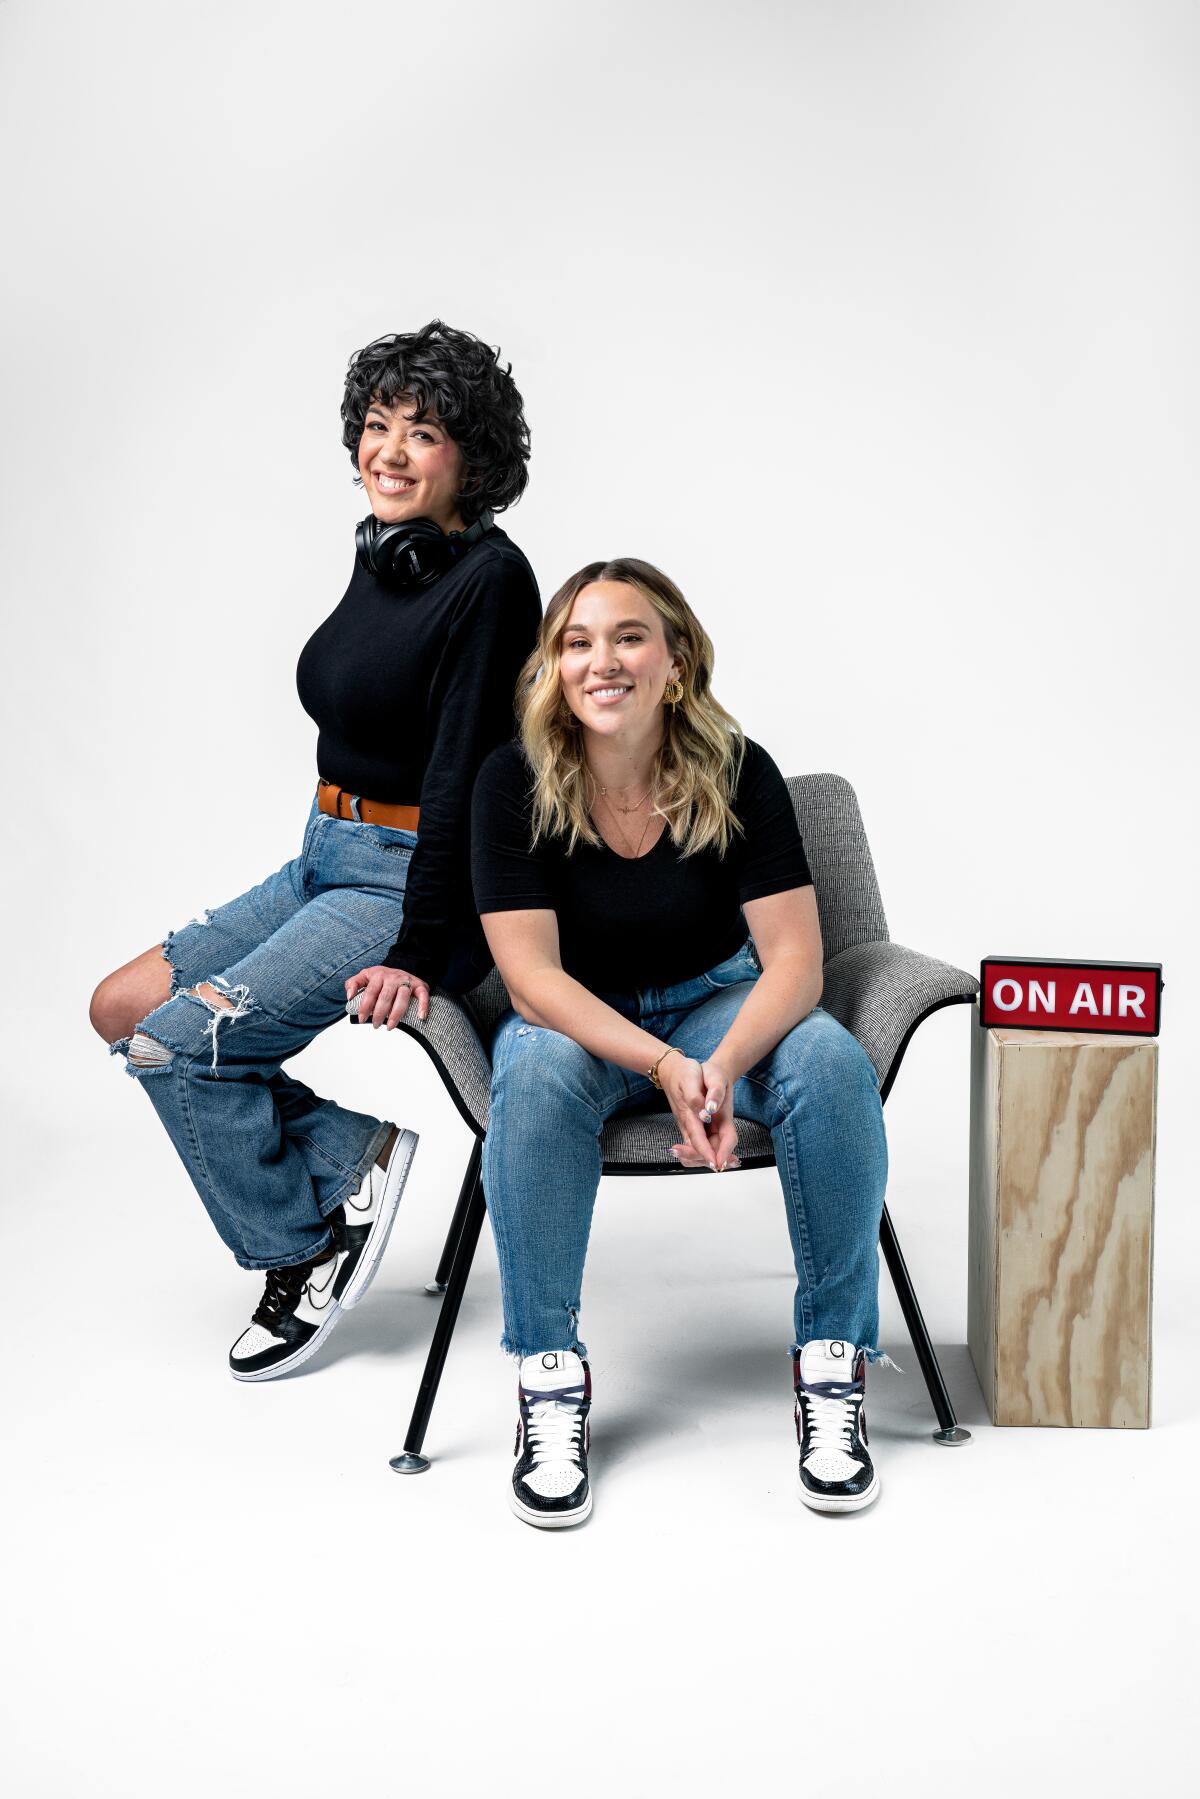 "Crime Junkie" hosts Brit Prawat, left, and Ashley Flowers sit in and on a chair by an "on air" sign.